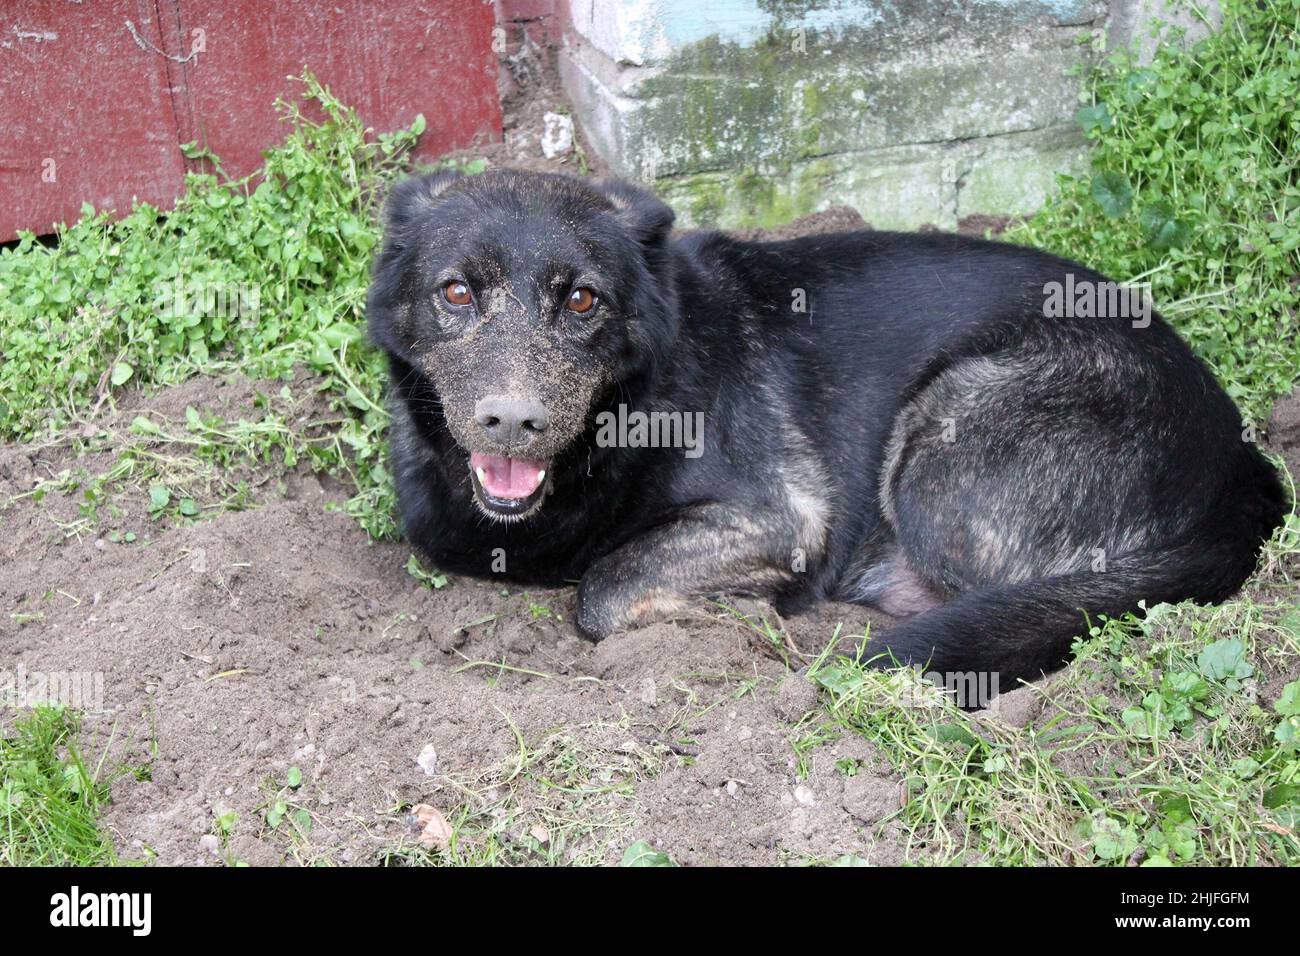 A black dog lies in a hole he has dug and has his muzzle soiled in the dirt. Stock Photo